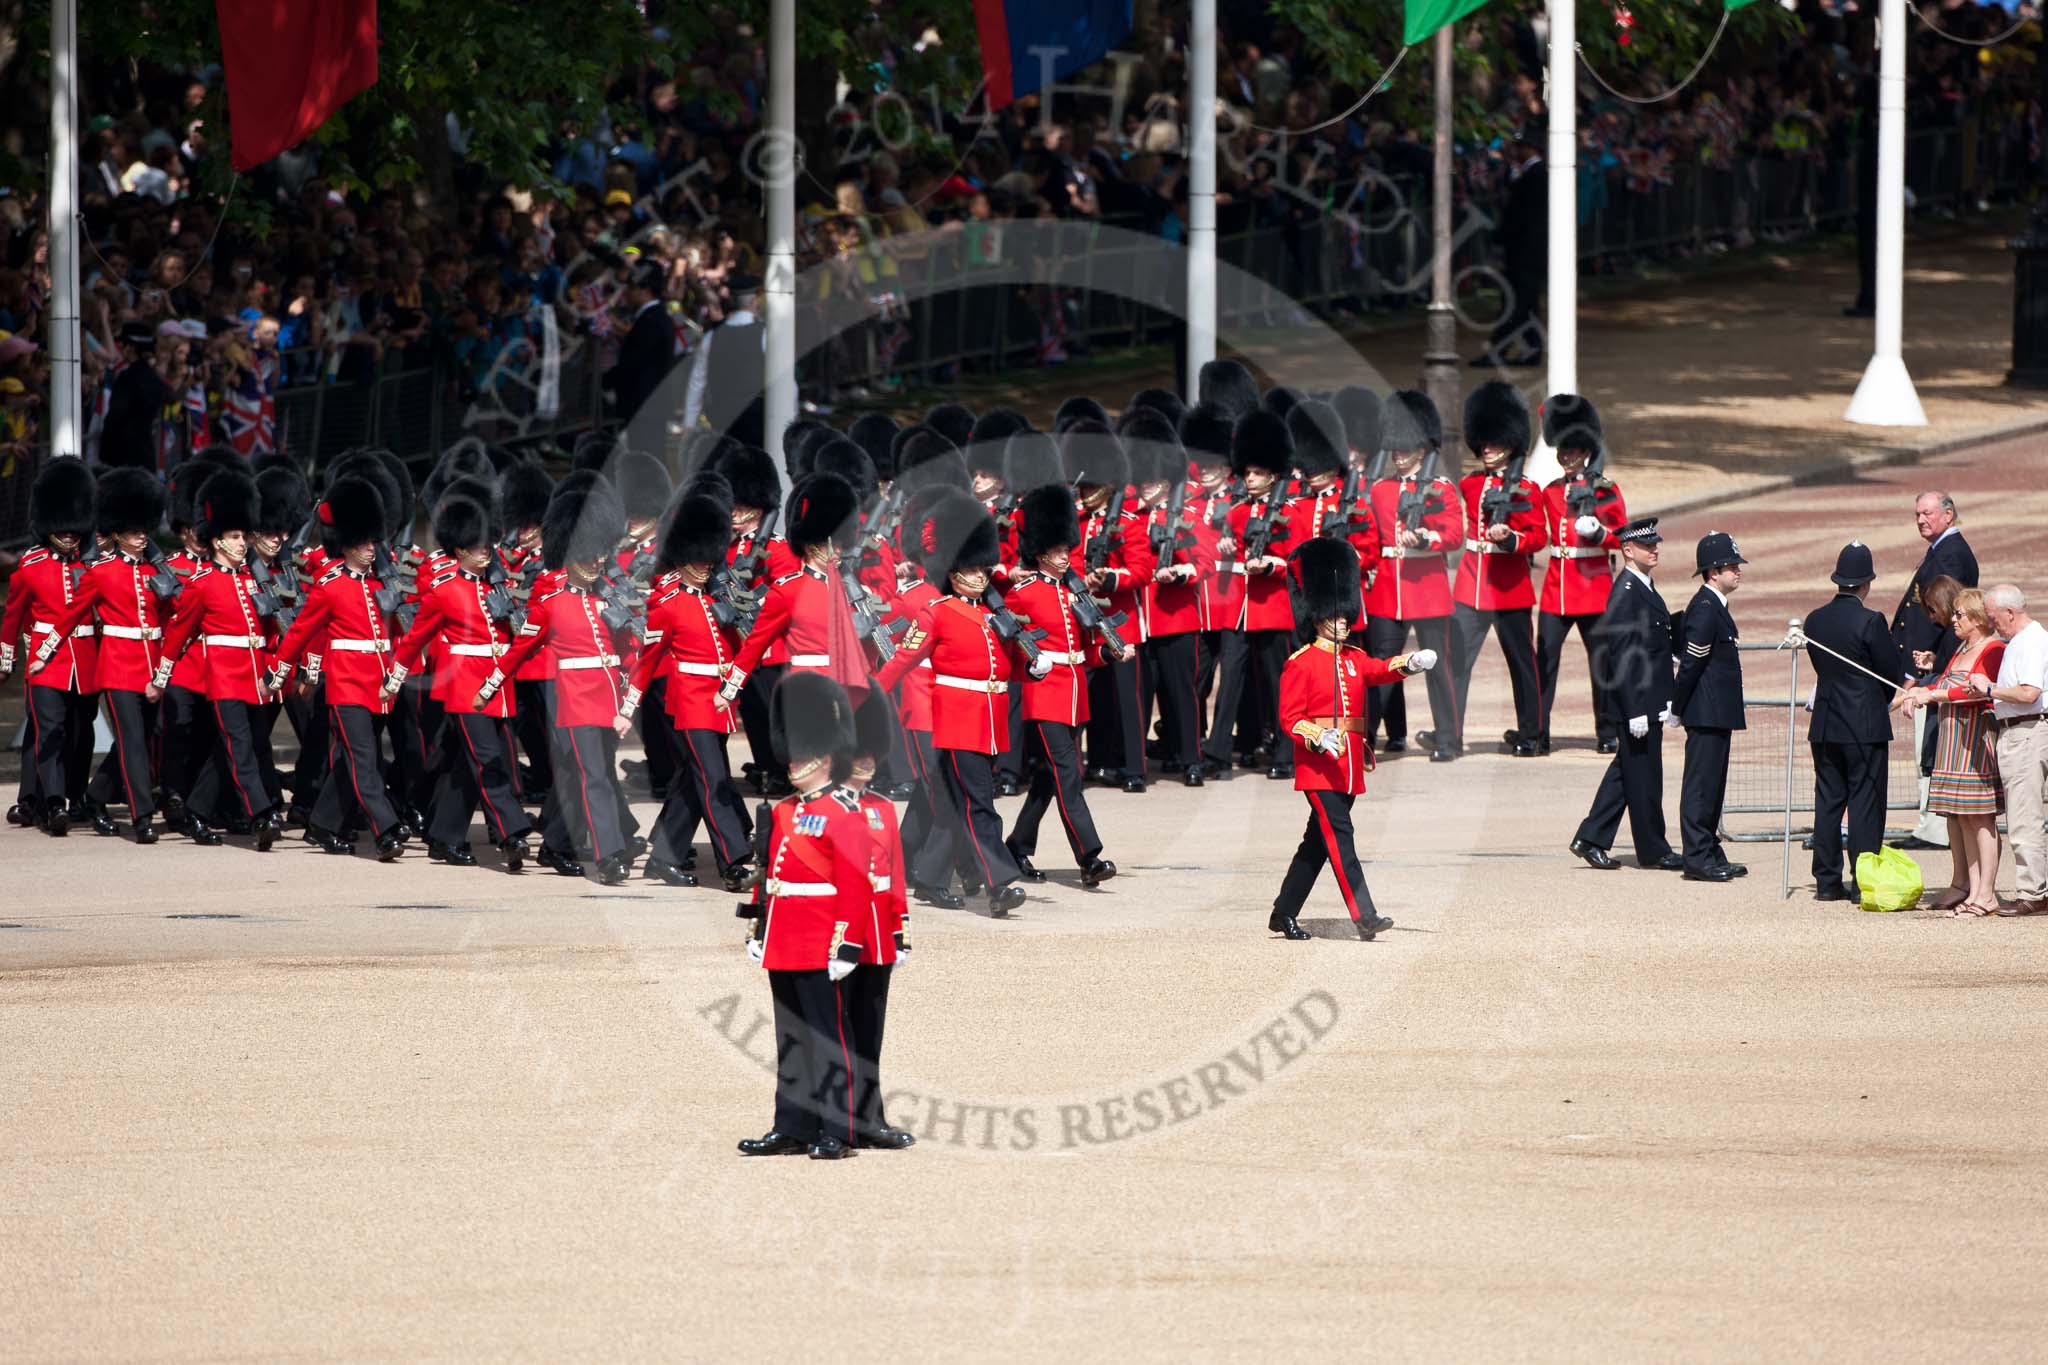 Trooping the Colour 2009: No.7 Guard, No.7 Company Coldstream Guards, lead by Captain M G M Hayhurst, marching to their position on Horse Guards Parade..
Horse Guards Parade, Westminster,
London SW1,

United Kingdom,
on 13 June 2009 at 10:20, image #32